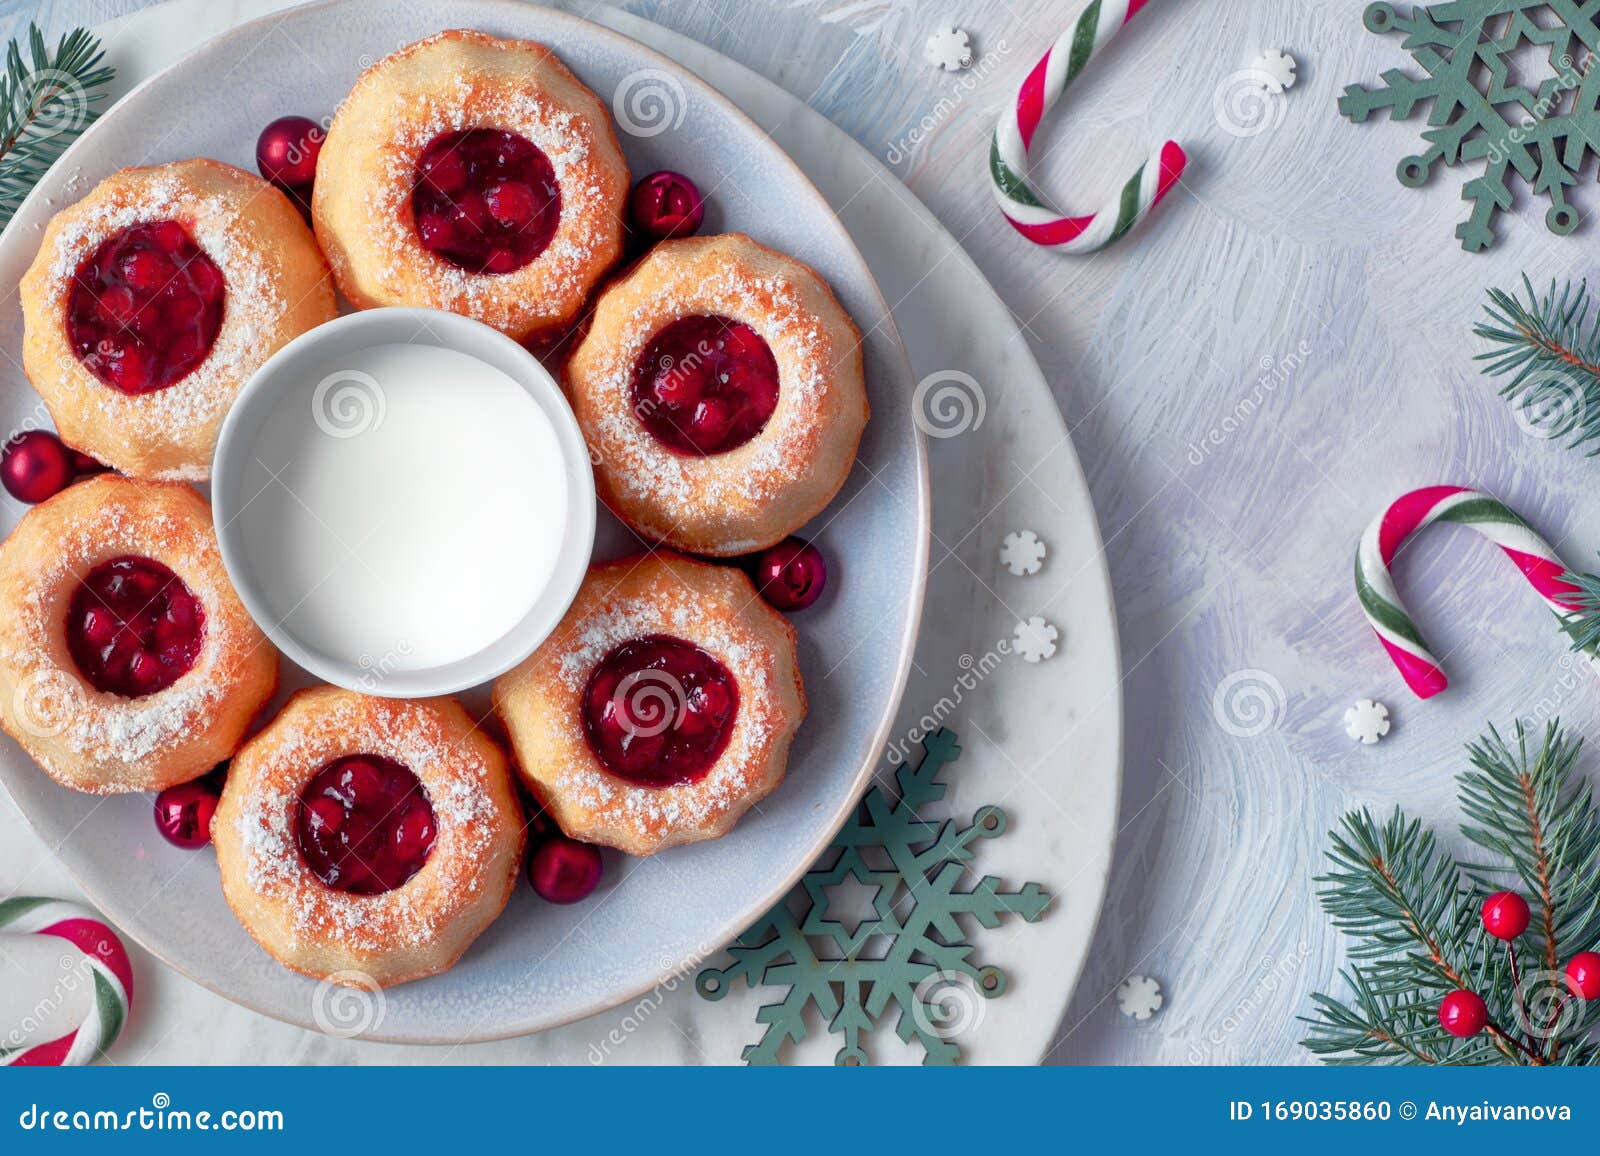 Mini Bundt Ring Cakes With Red Whortleberry Jam On Light Background With Fir Twigs Berries And Candy Canes Stock Photo Image Of Board Food 169035860